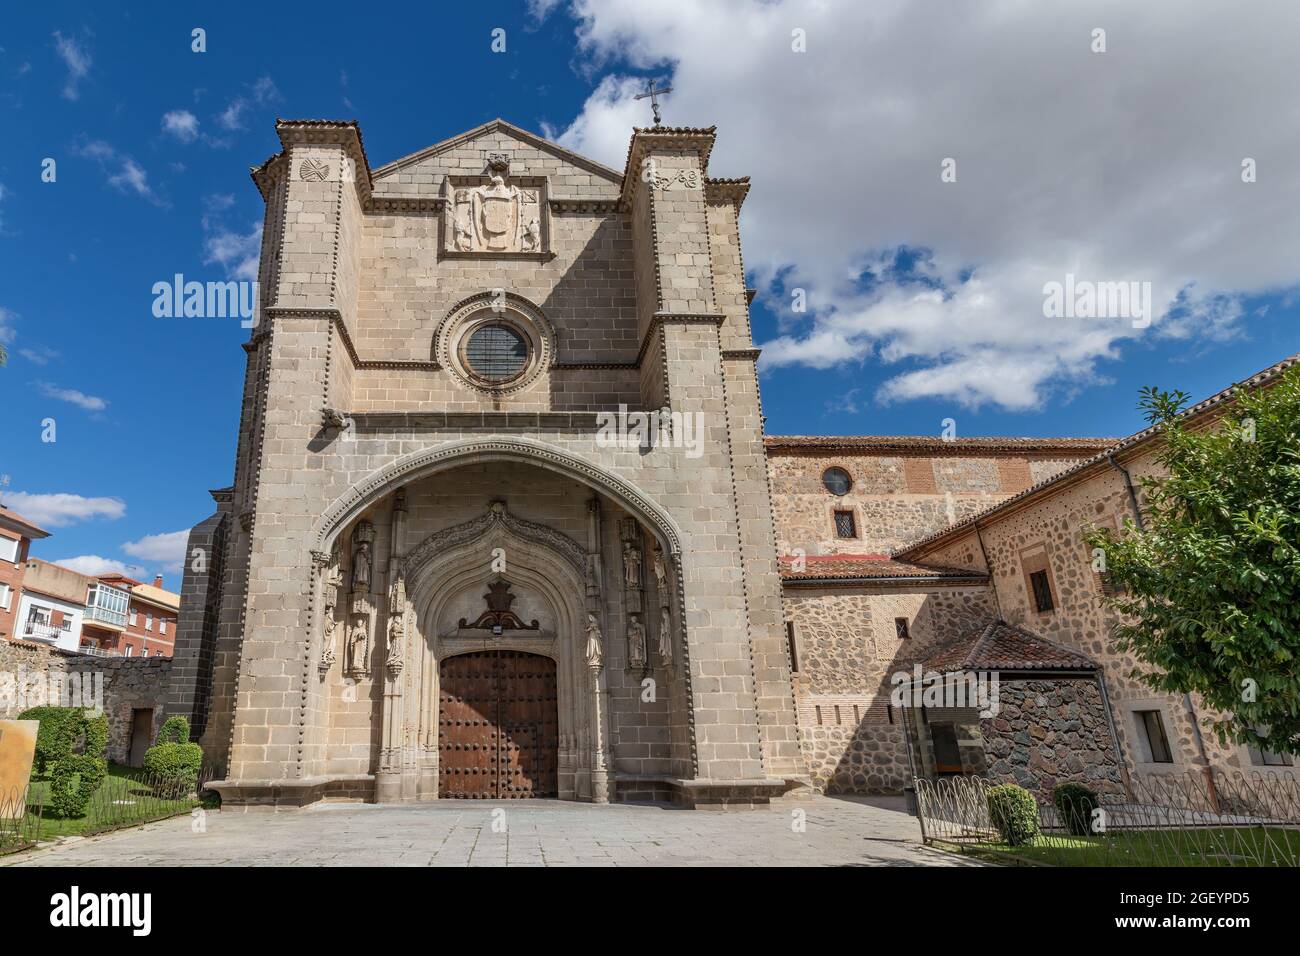 The Royal Monastery of St. Thomas or Real Monasterio de Santo Tomás in Avila Spanish, was constructed from los Reyes Católicos, Fernando and Isabel, a Stock Photo